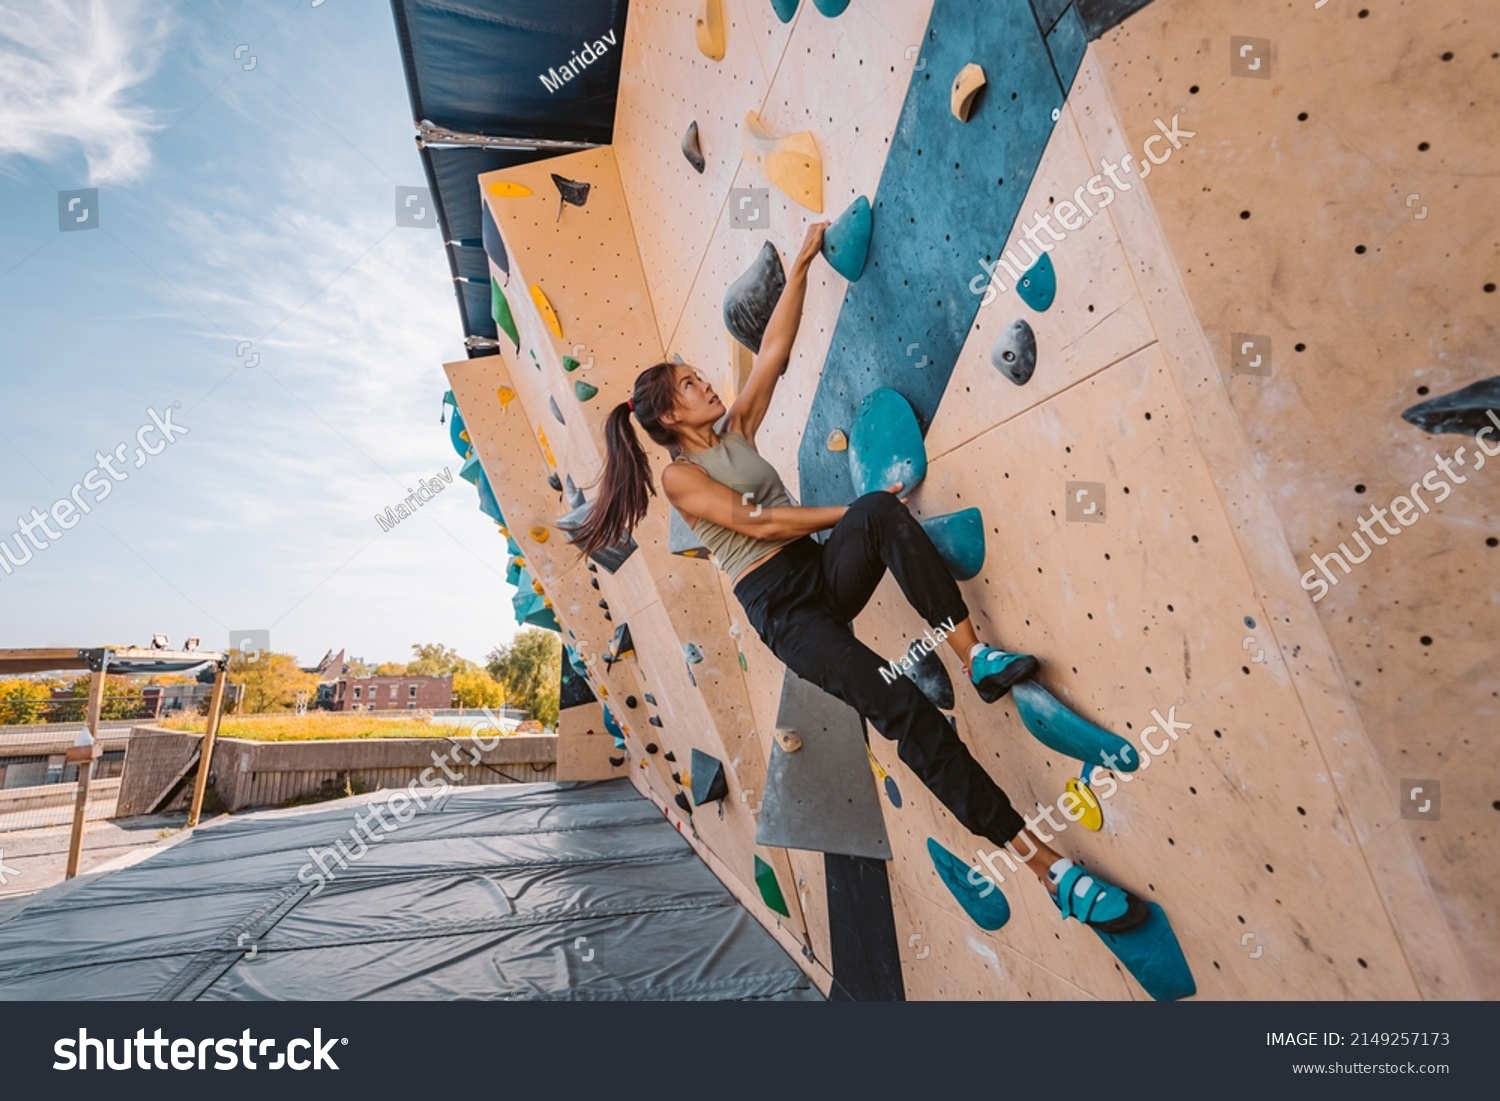 Asian climber woman climbing up outdoor bouldering wall at fitness gym. Fun active sport activity exercise outside #2149257173